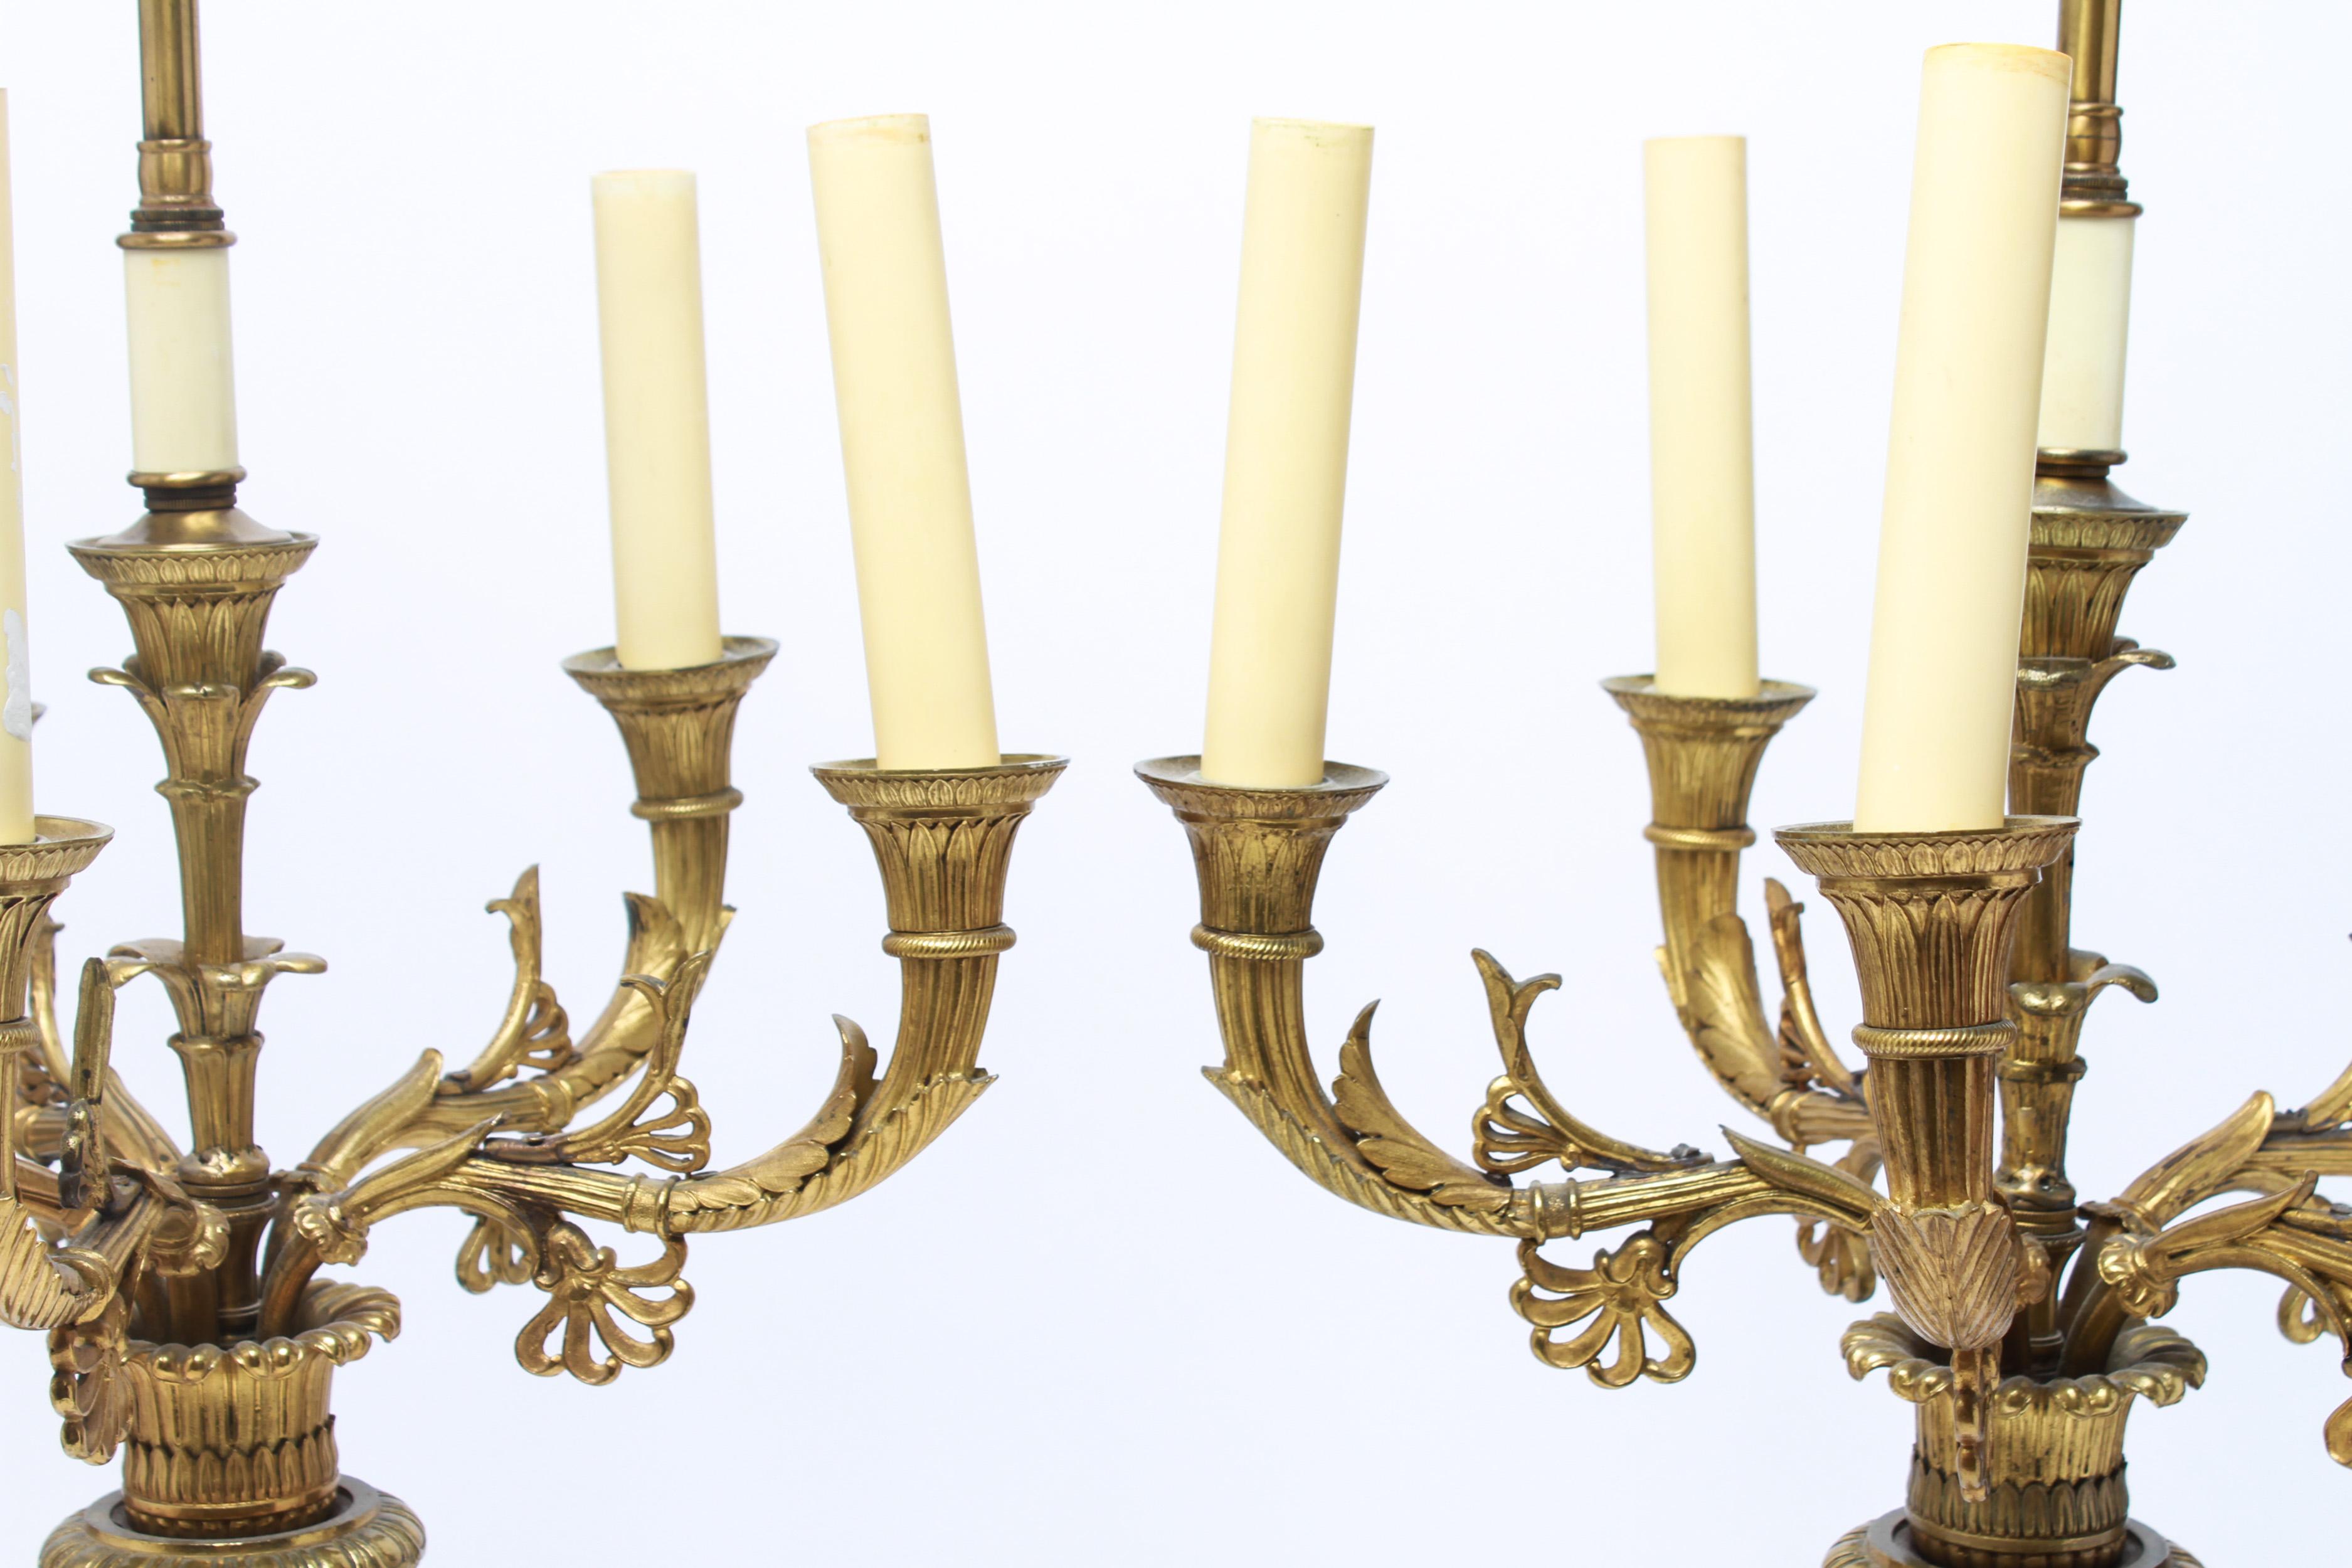 European Neoclassical Candelabra Table Lamps in Gilt Bronze